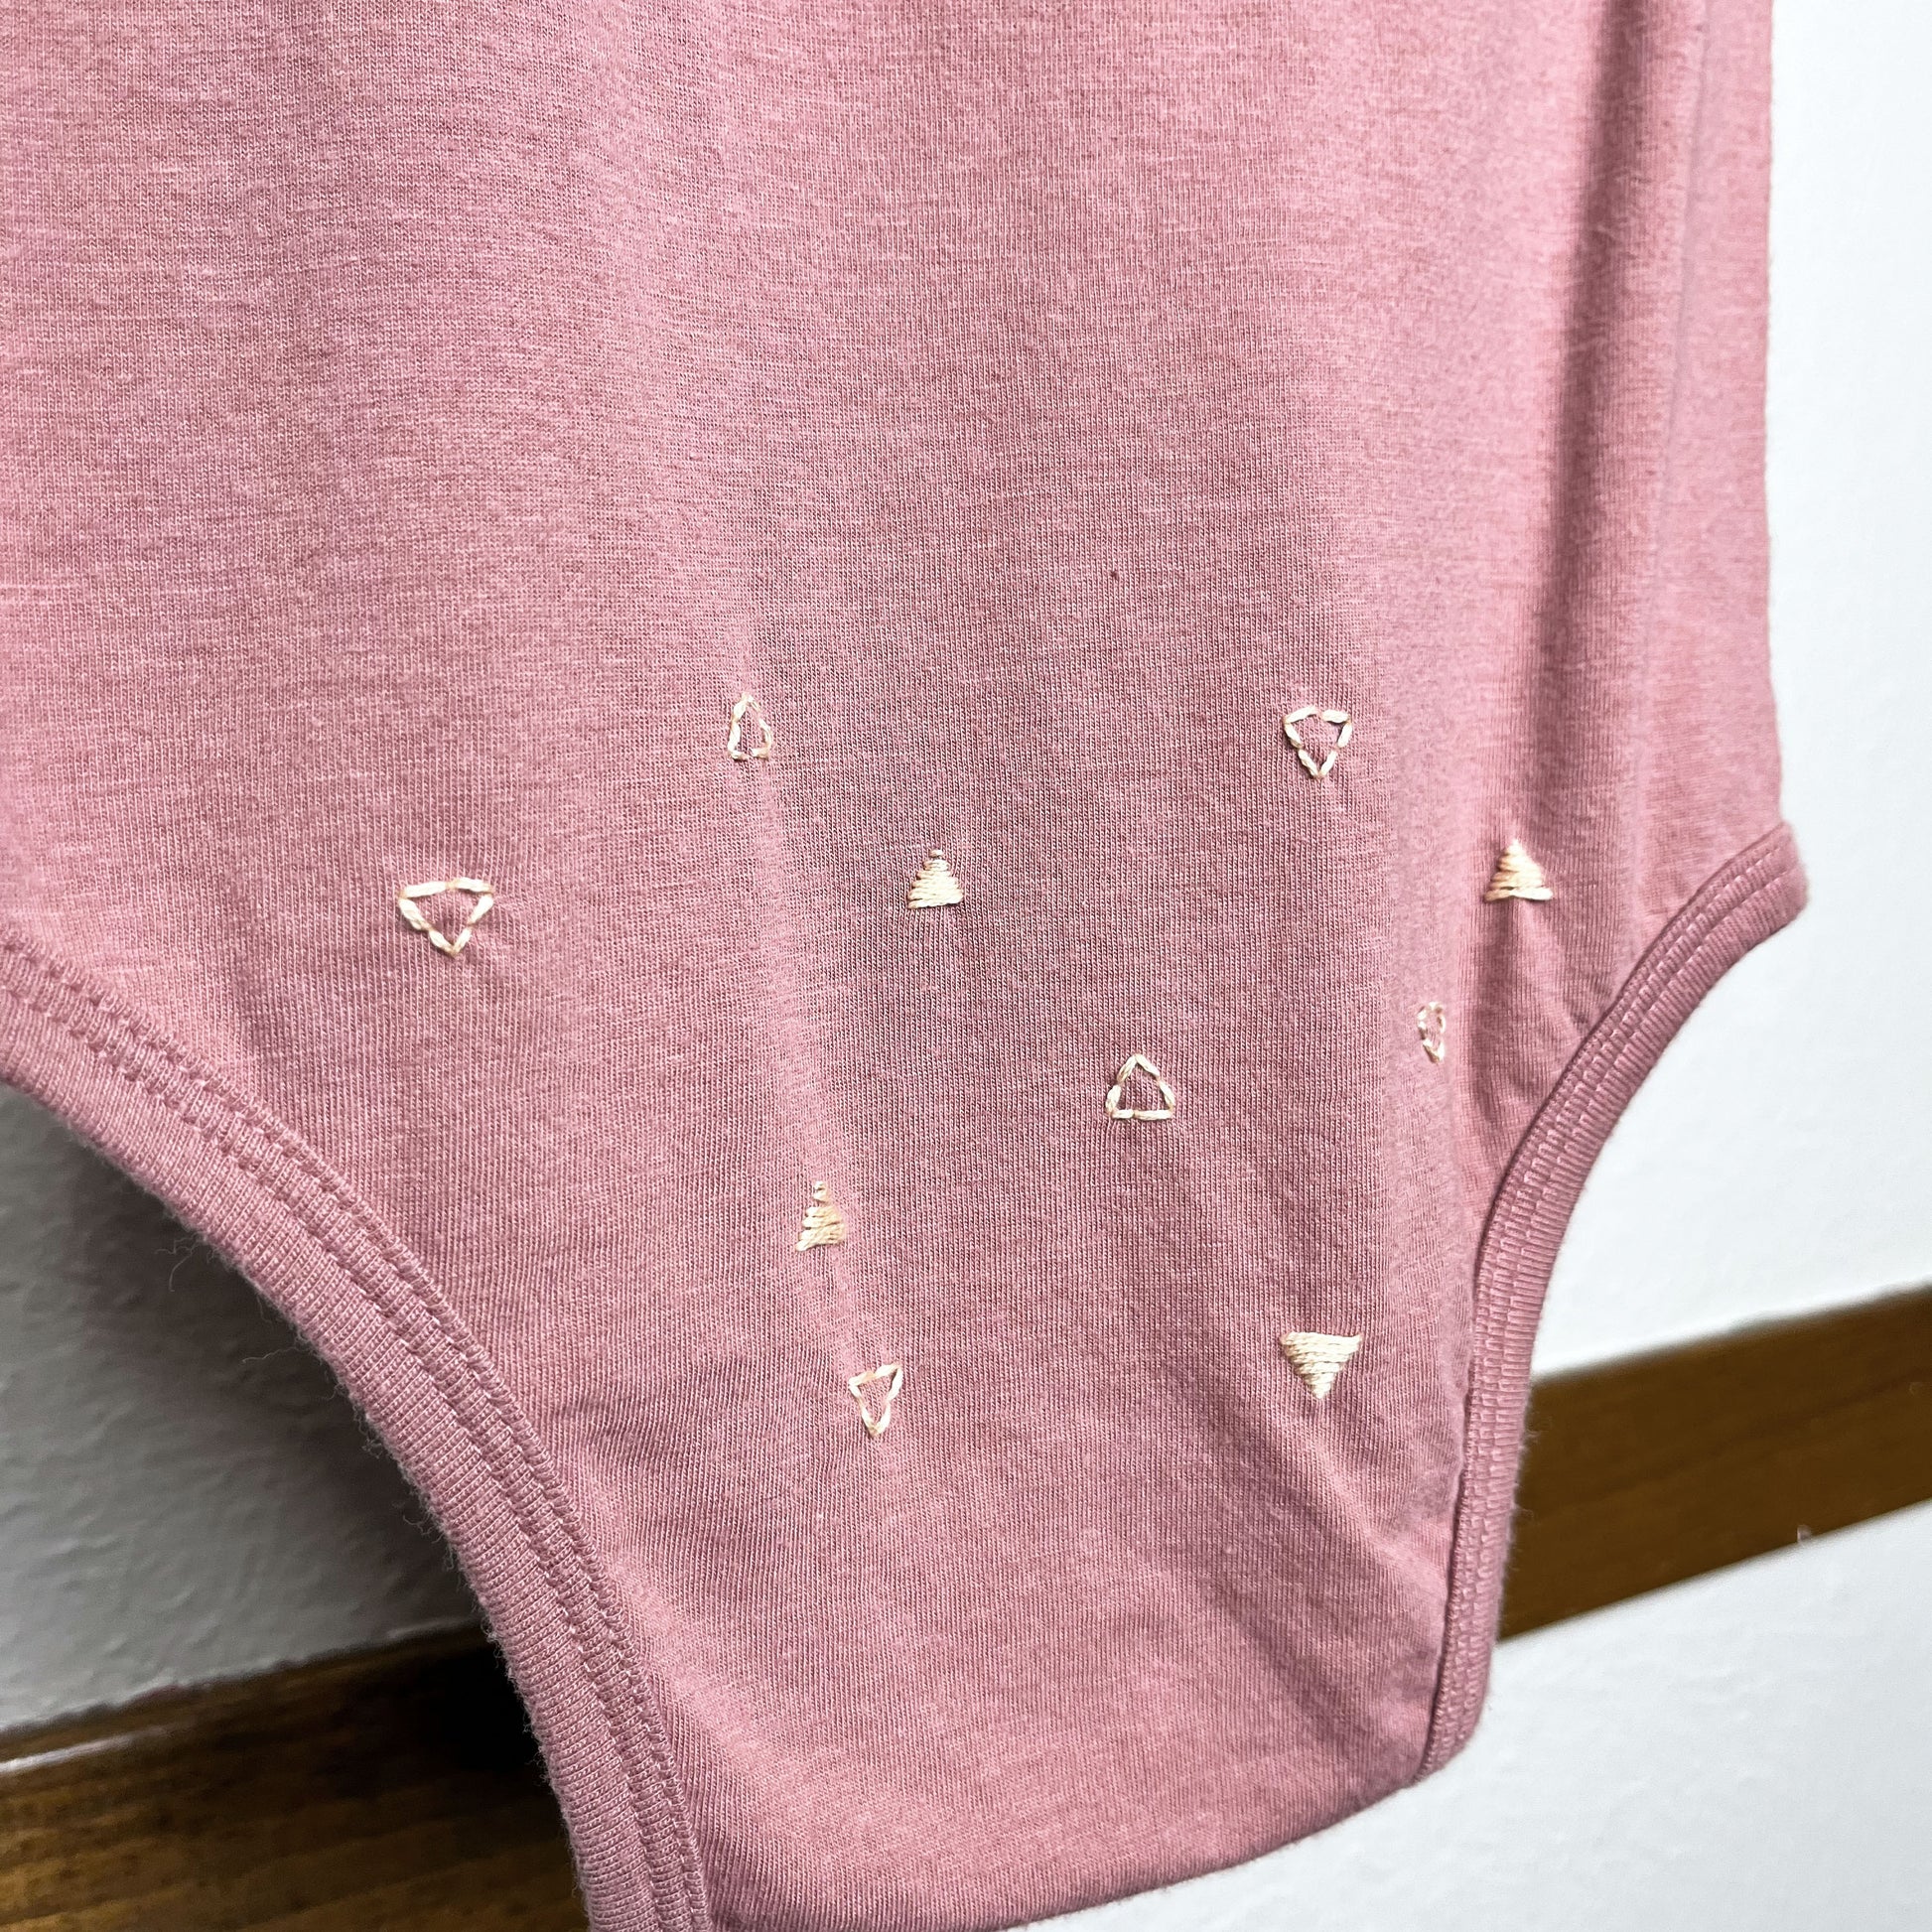 Close up view of a mauve baby one piece,  with small peach triangle stitches scattered over the bum